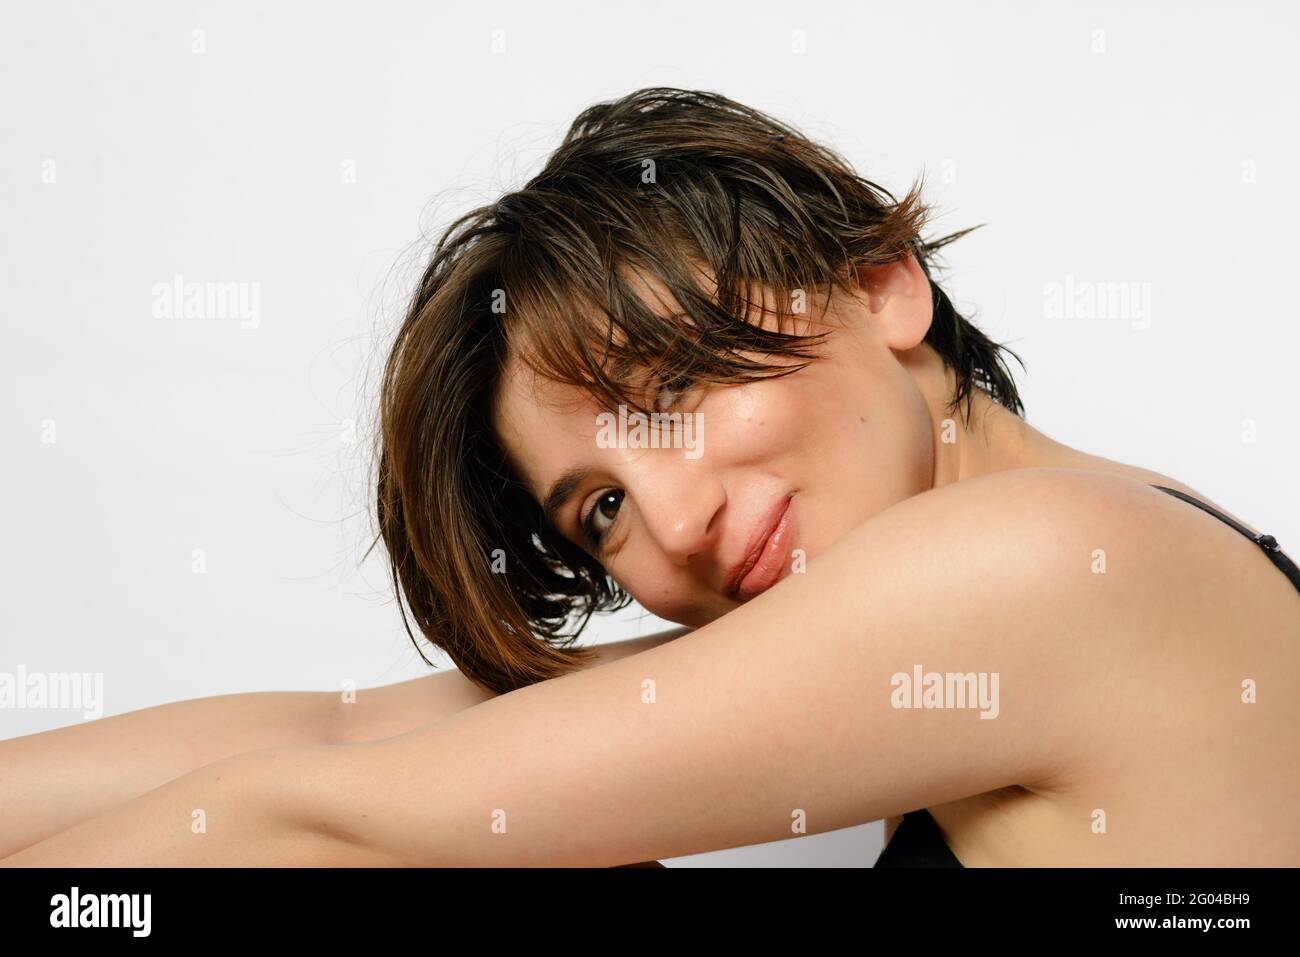 Portrait of a smiling young woman with short and wet hair and a funny emotion on her face on a white background. Stock Photo